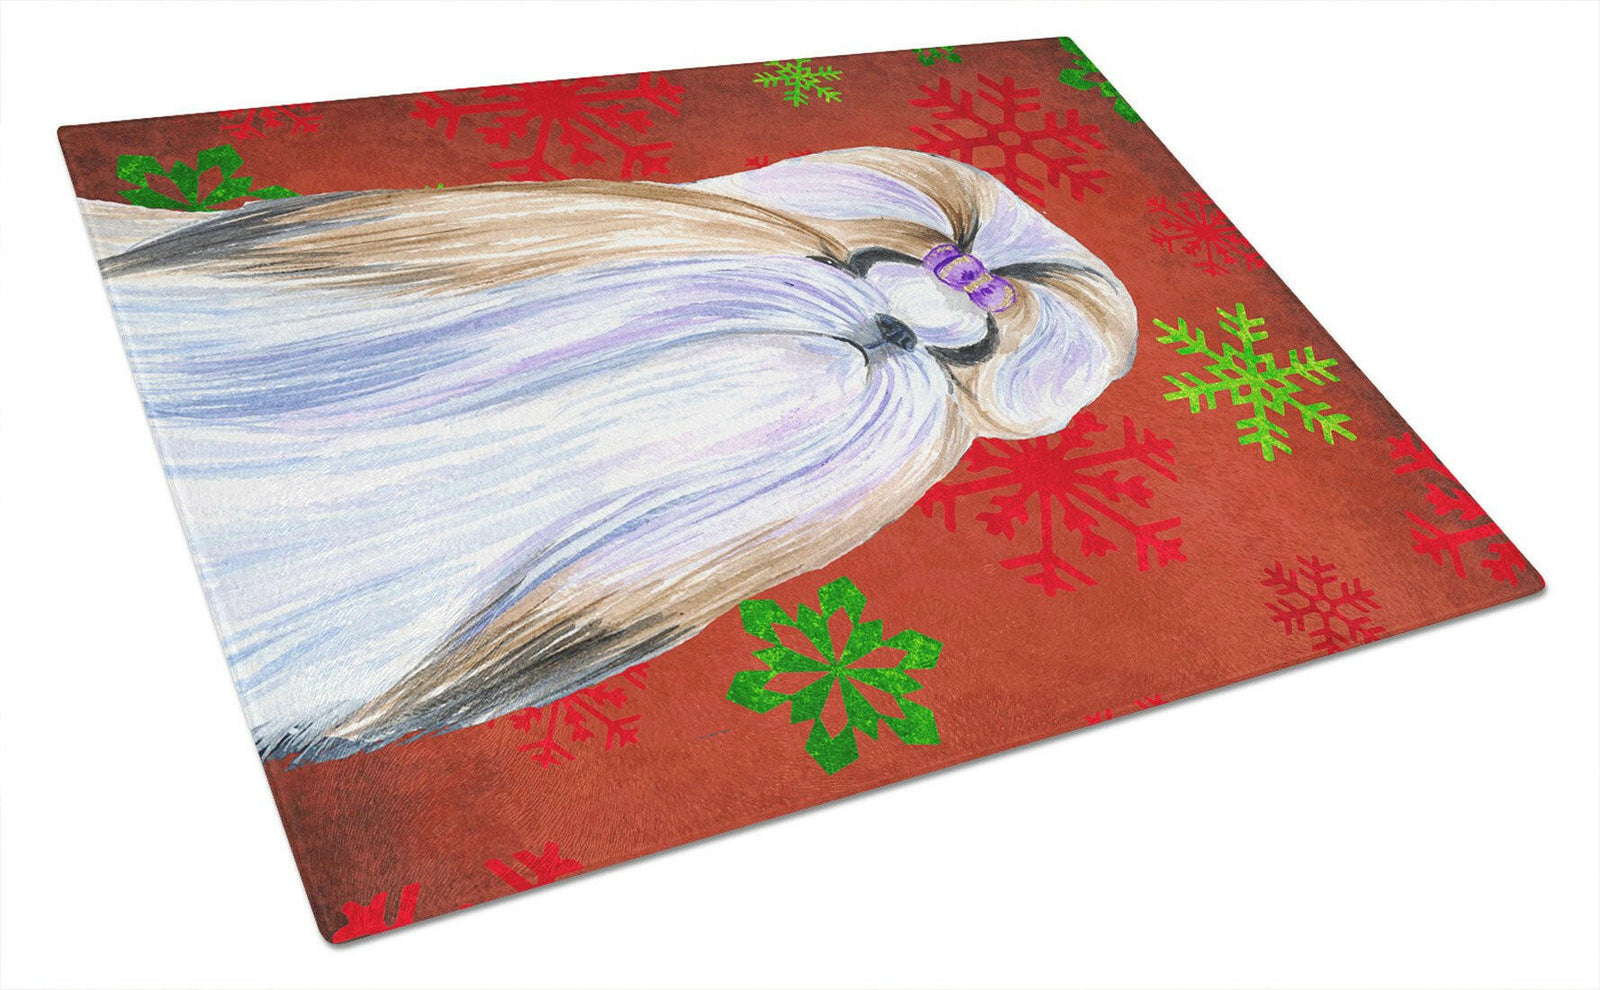 Shih Tzu Red and Green Snowflakes Holiday Christmas Glass Cutting Board Large by Caroline's Treasures